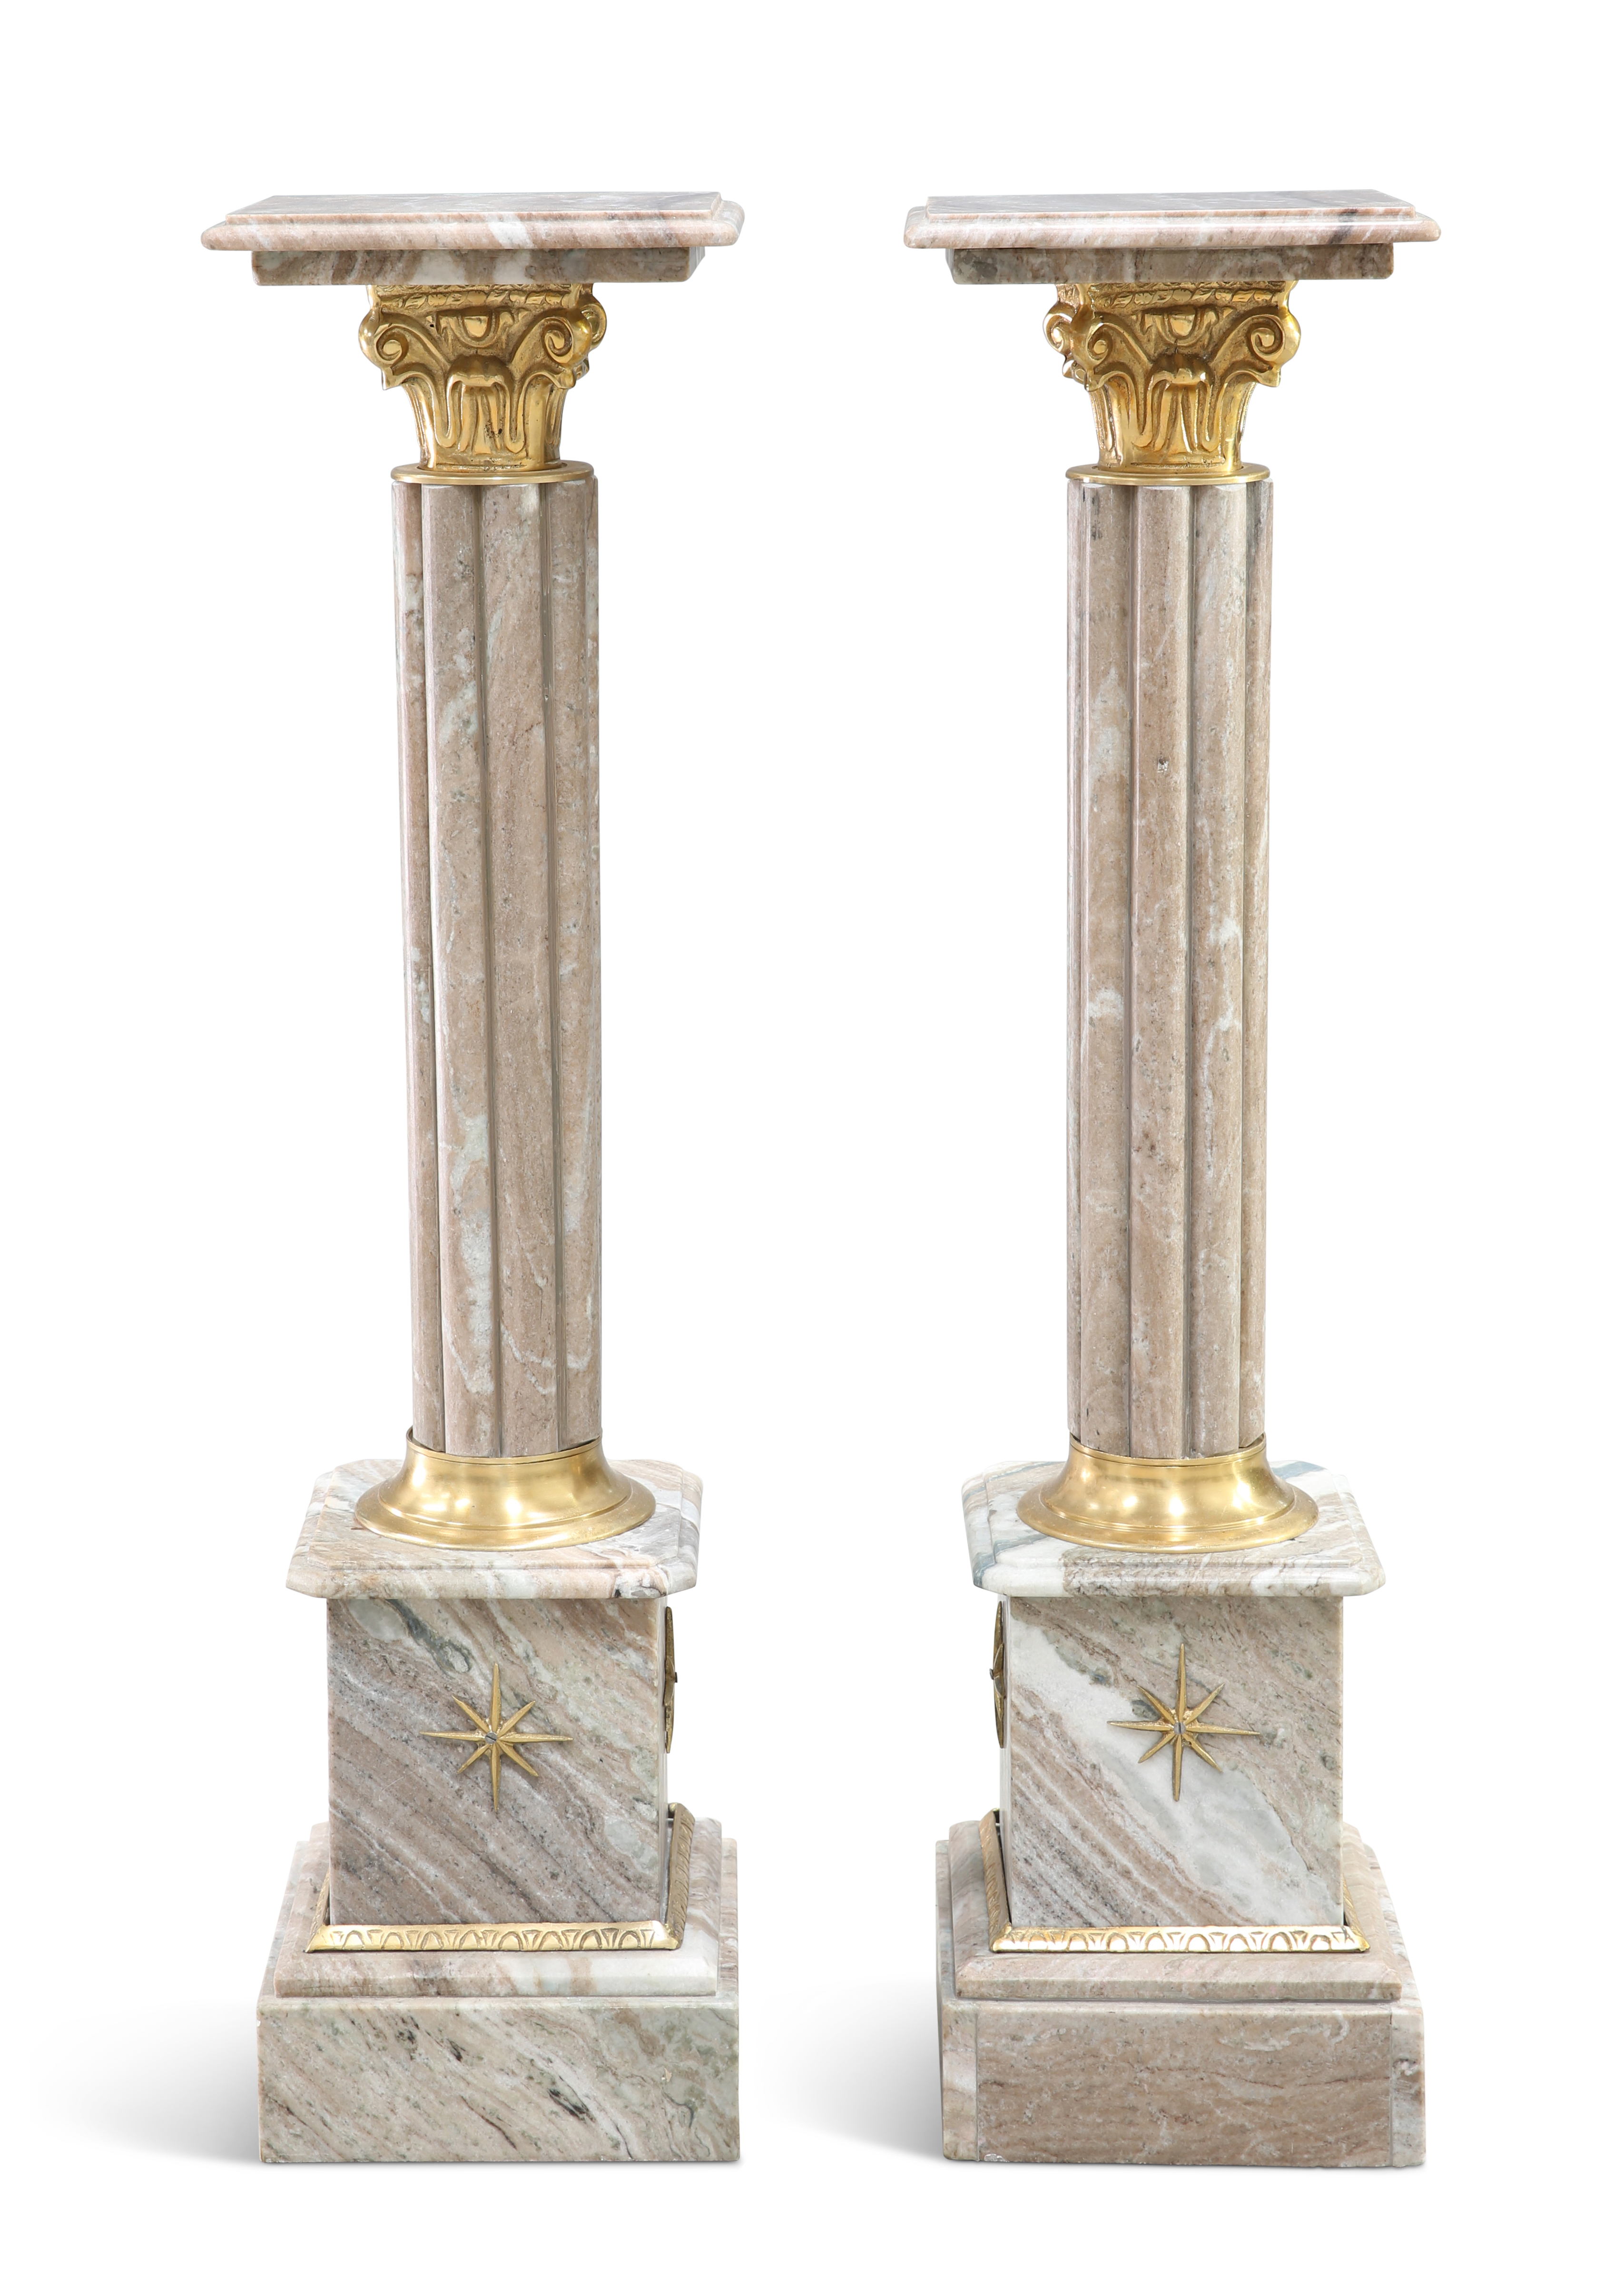 A PAIR OF GILT-METAL MOUNTED MARBLE TORCHÉRE STANDS